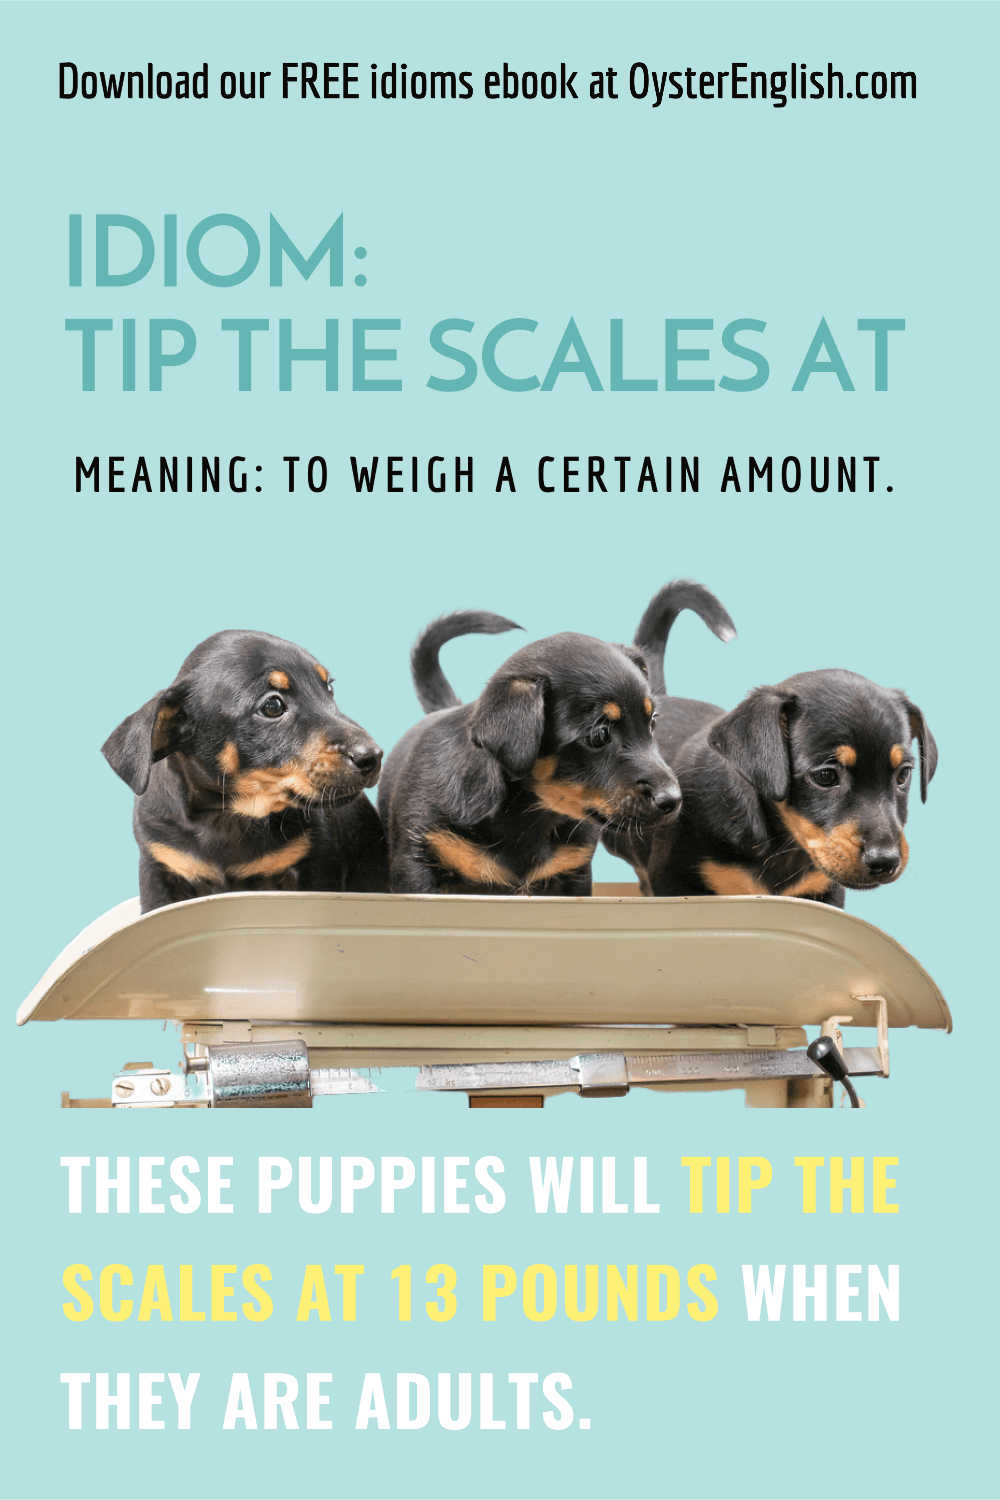 Three Jack Russell puppies are standing in an old-fashioned scale depicting the idiom "tip the scales at." Caption: These puppies will tip the scale at 13 pounds when they are adults.